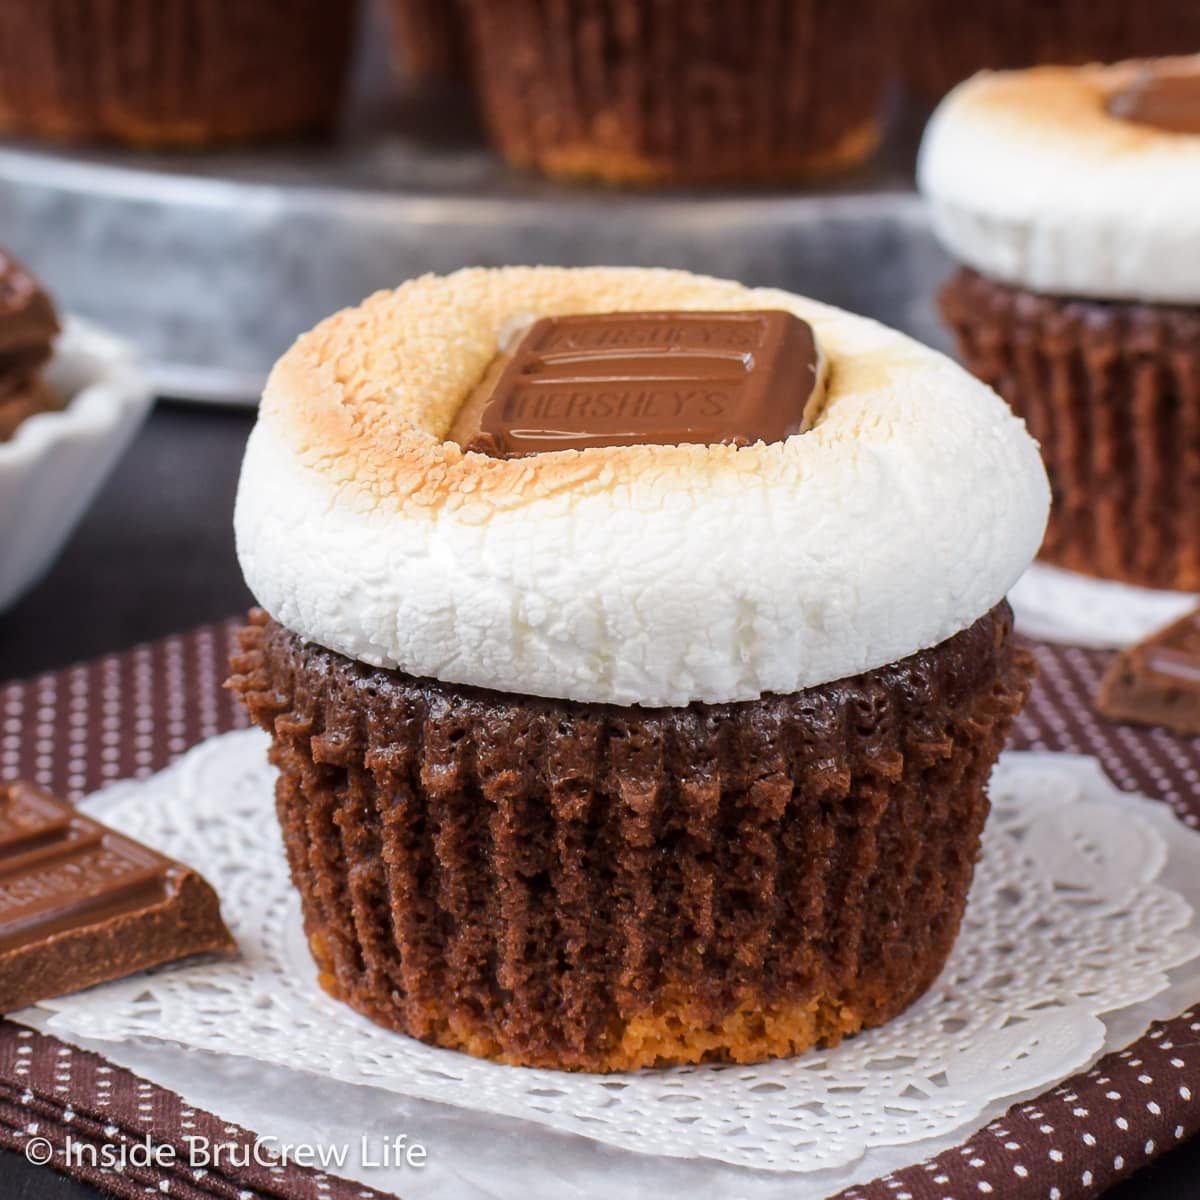 A chocolate cupcake topped with toasted marshmallow and a candy bar.